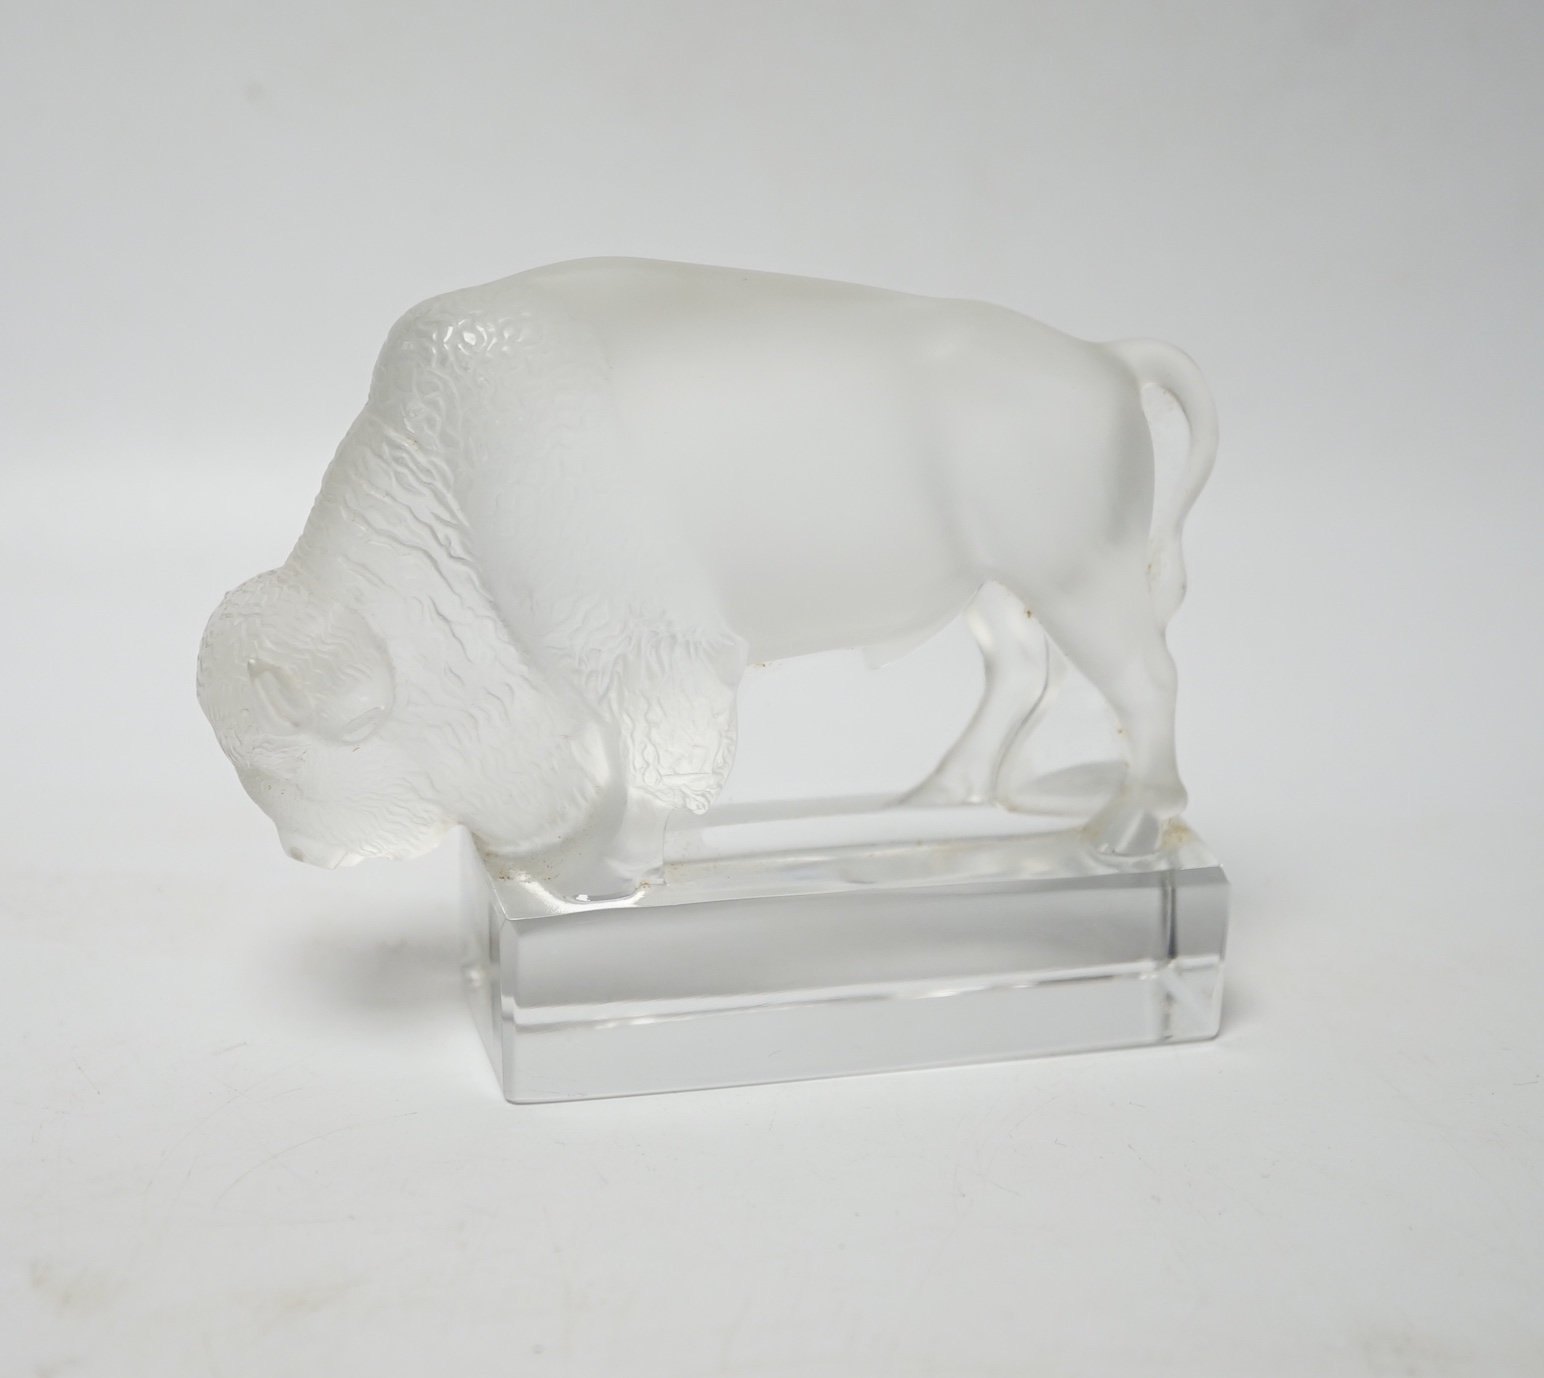 Rene Lalique, a frosted glass paperweight modelled as a bison, signed ‘Lalique France’ to base 12.5cm wide                                                                                                                  